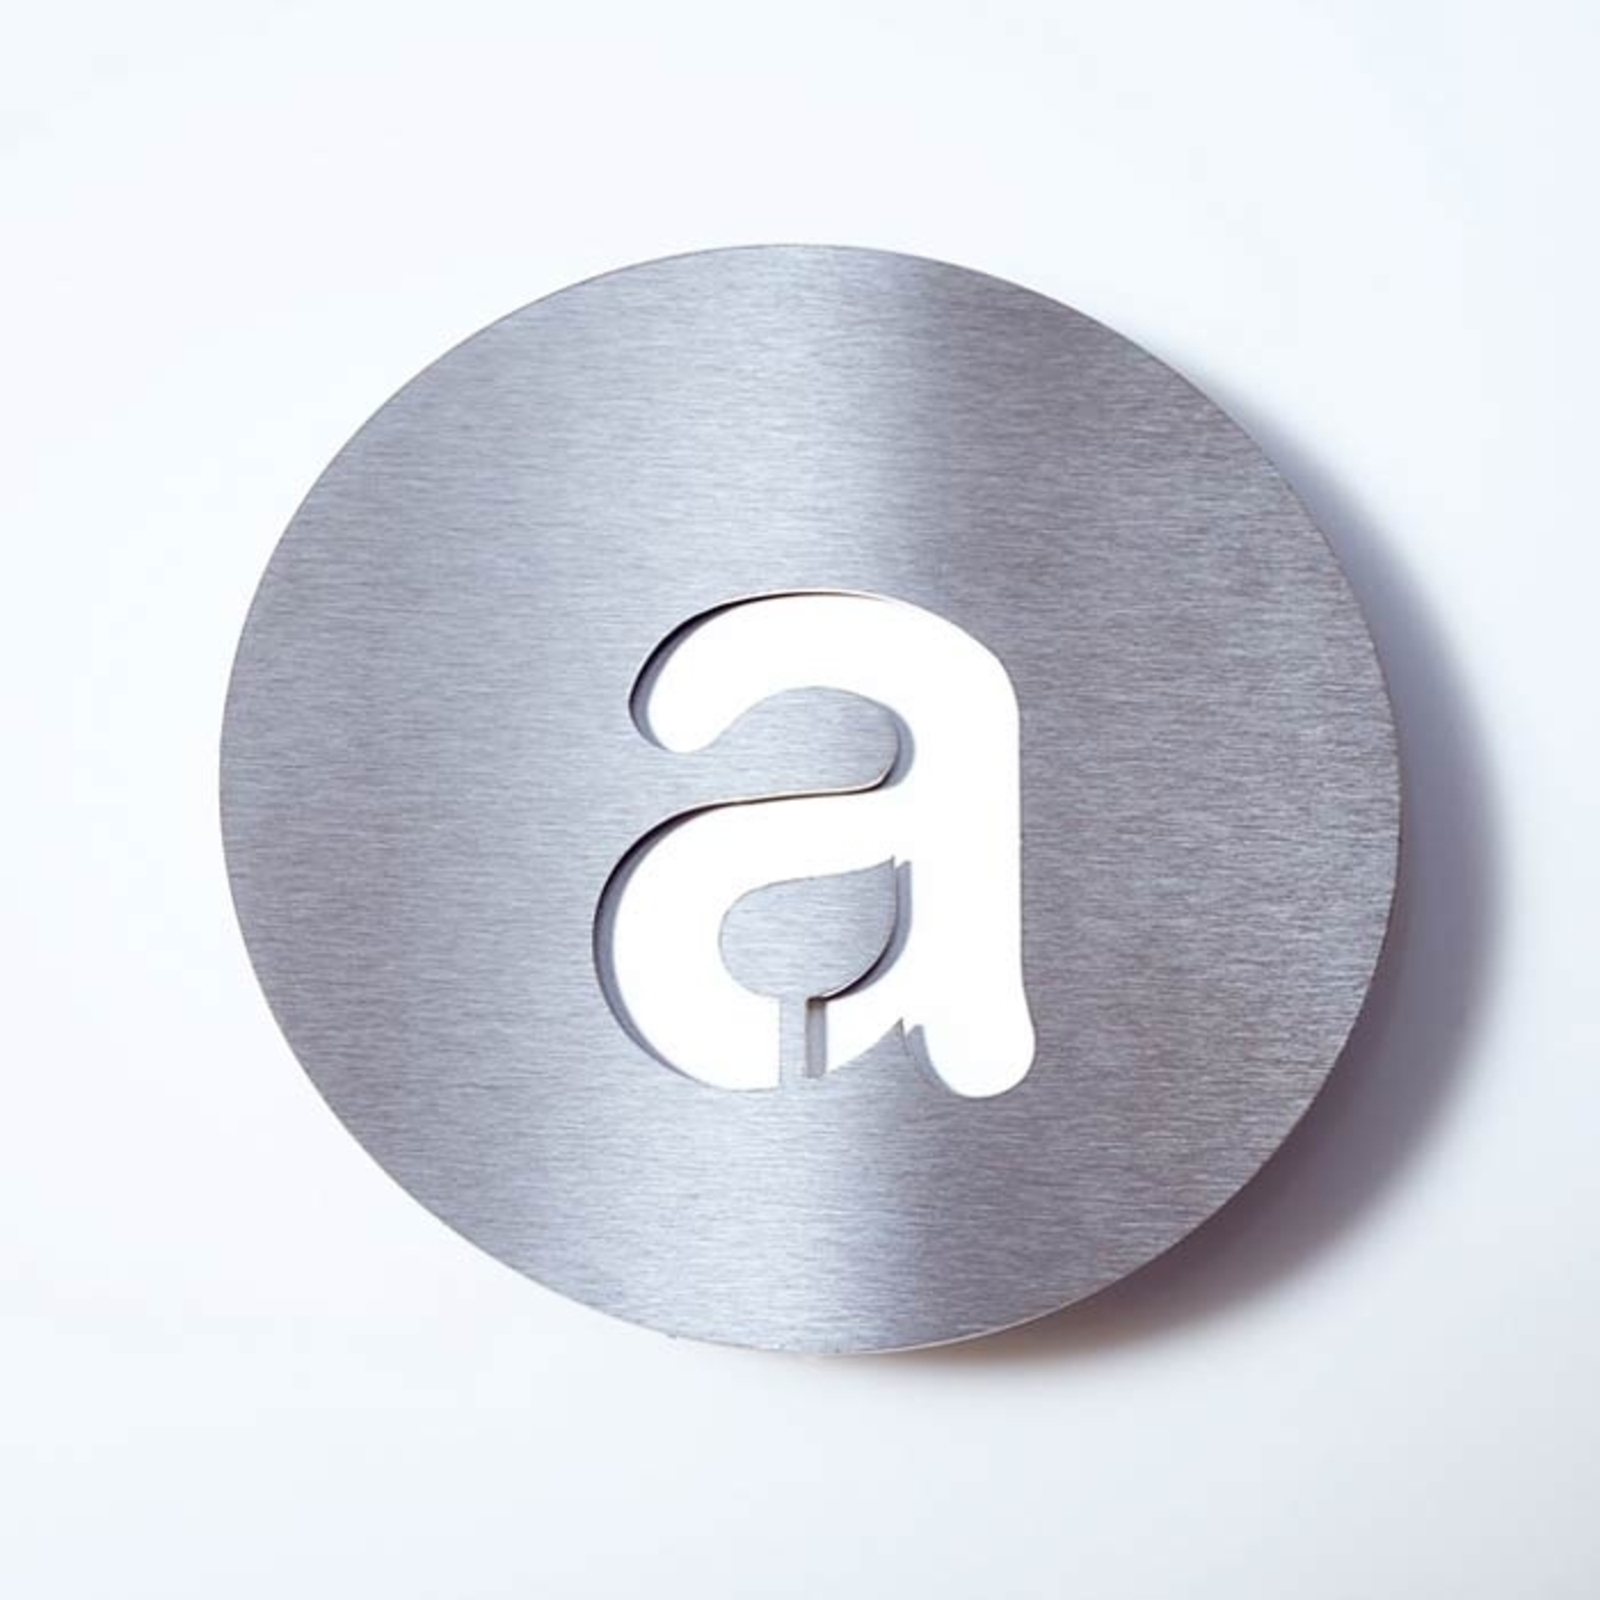 Round stainless steel house number - a